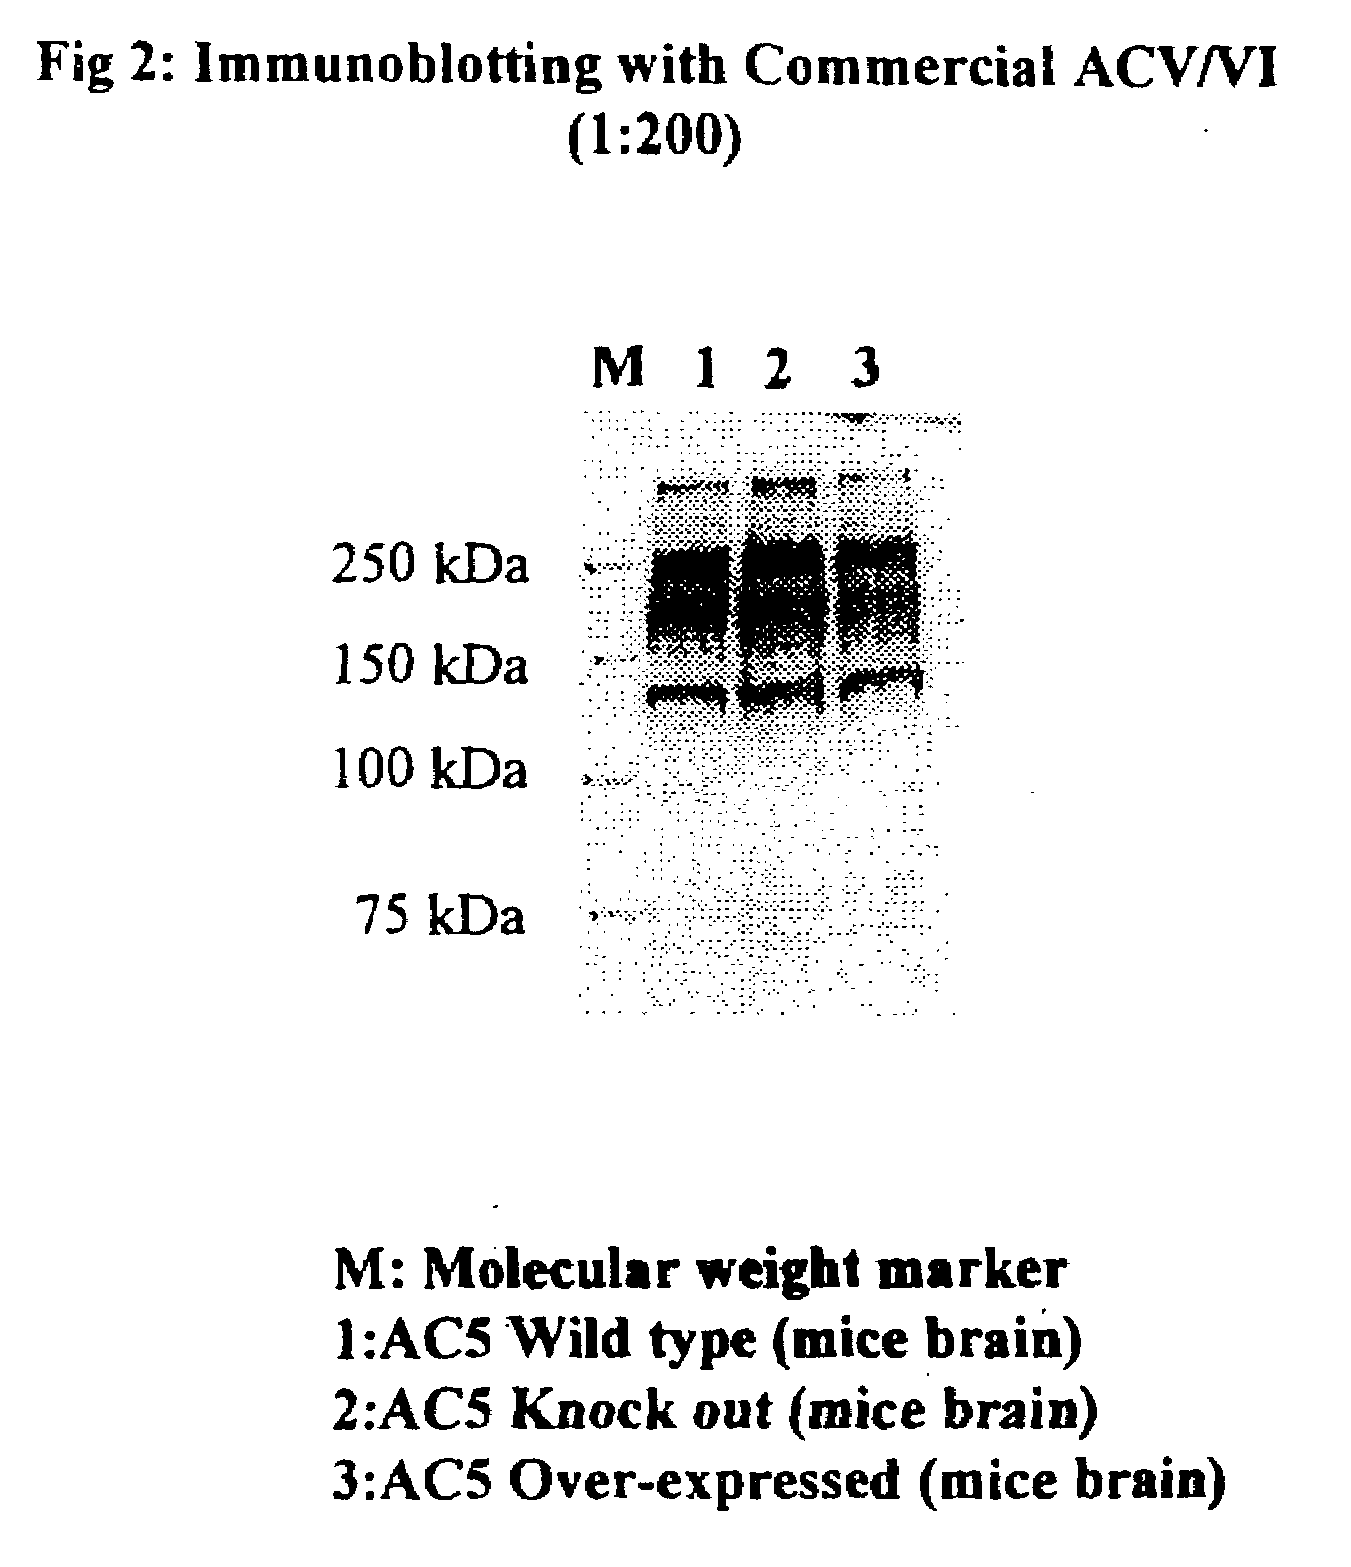 Adenylyl Cyclase Antibodies, Compositions and Uses Thereof